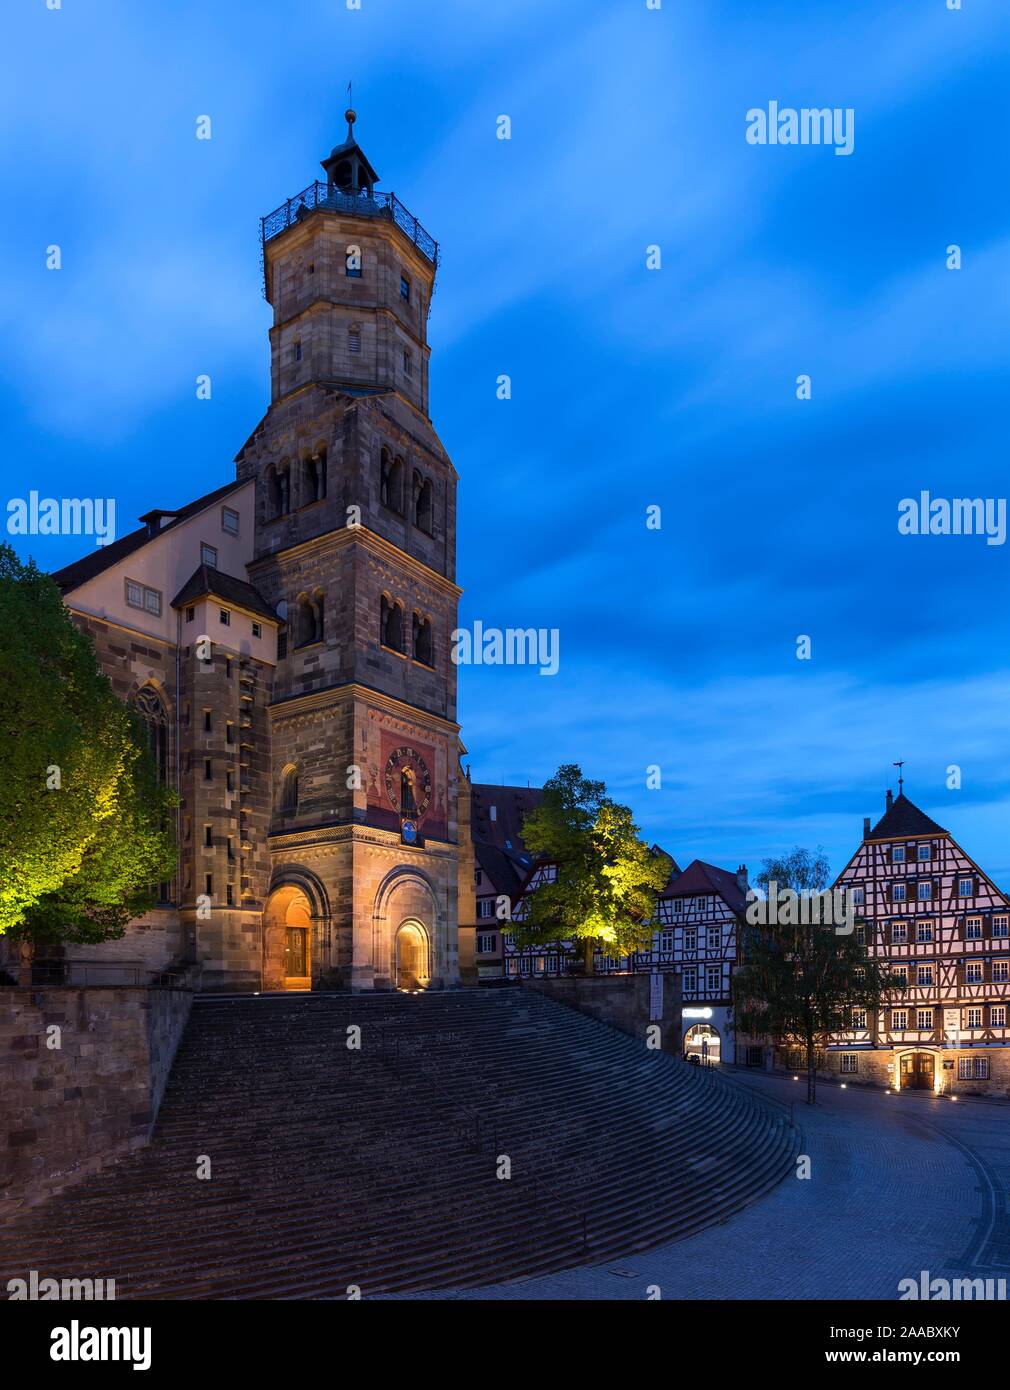 St. Michael with large open stairs at dusk, Schwabisch Hall, Baden-Wurttemberg, Germany Stock Photo